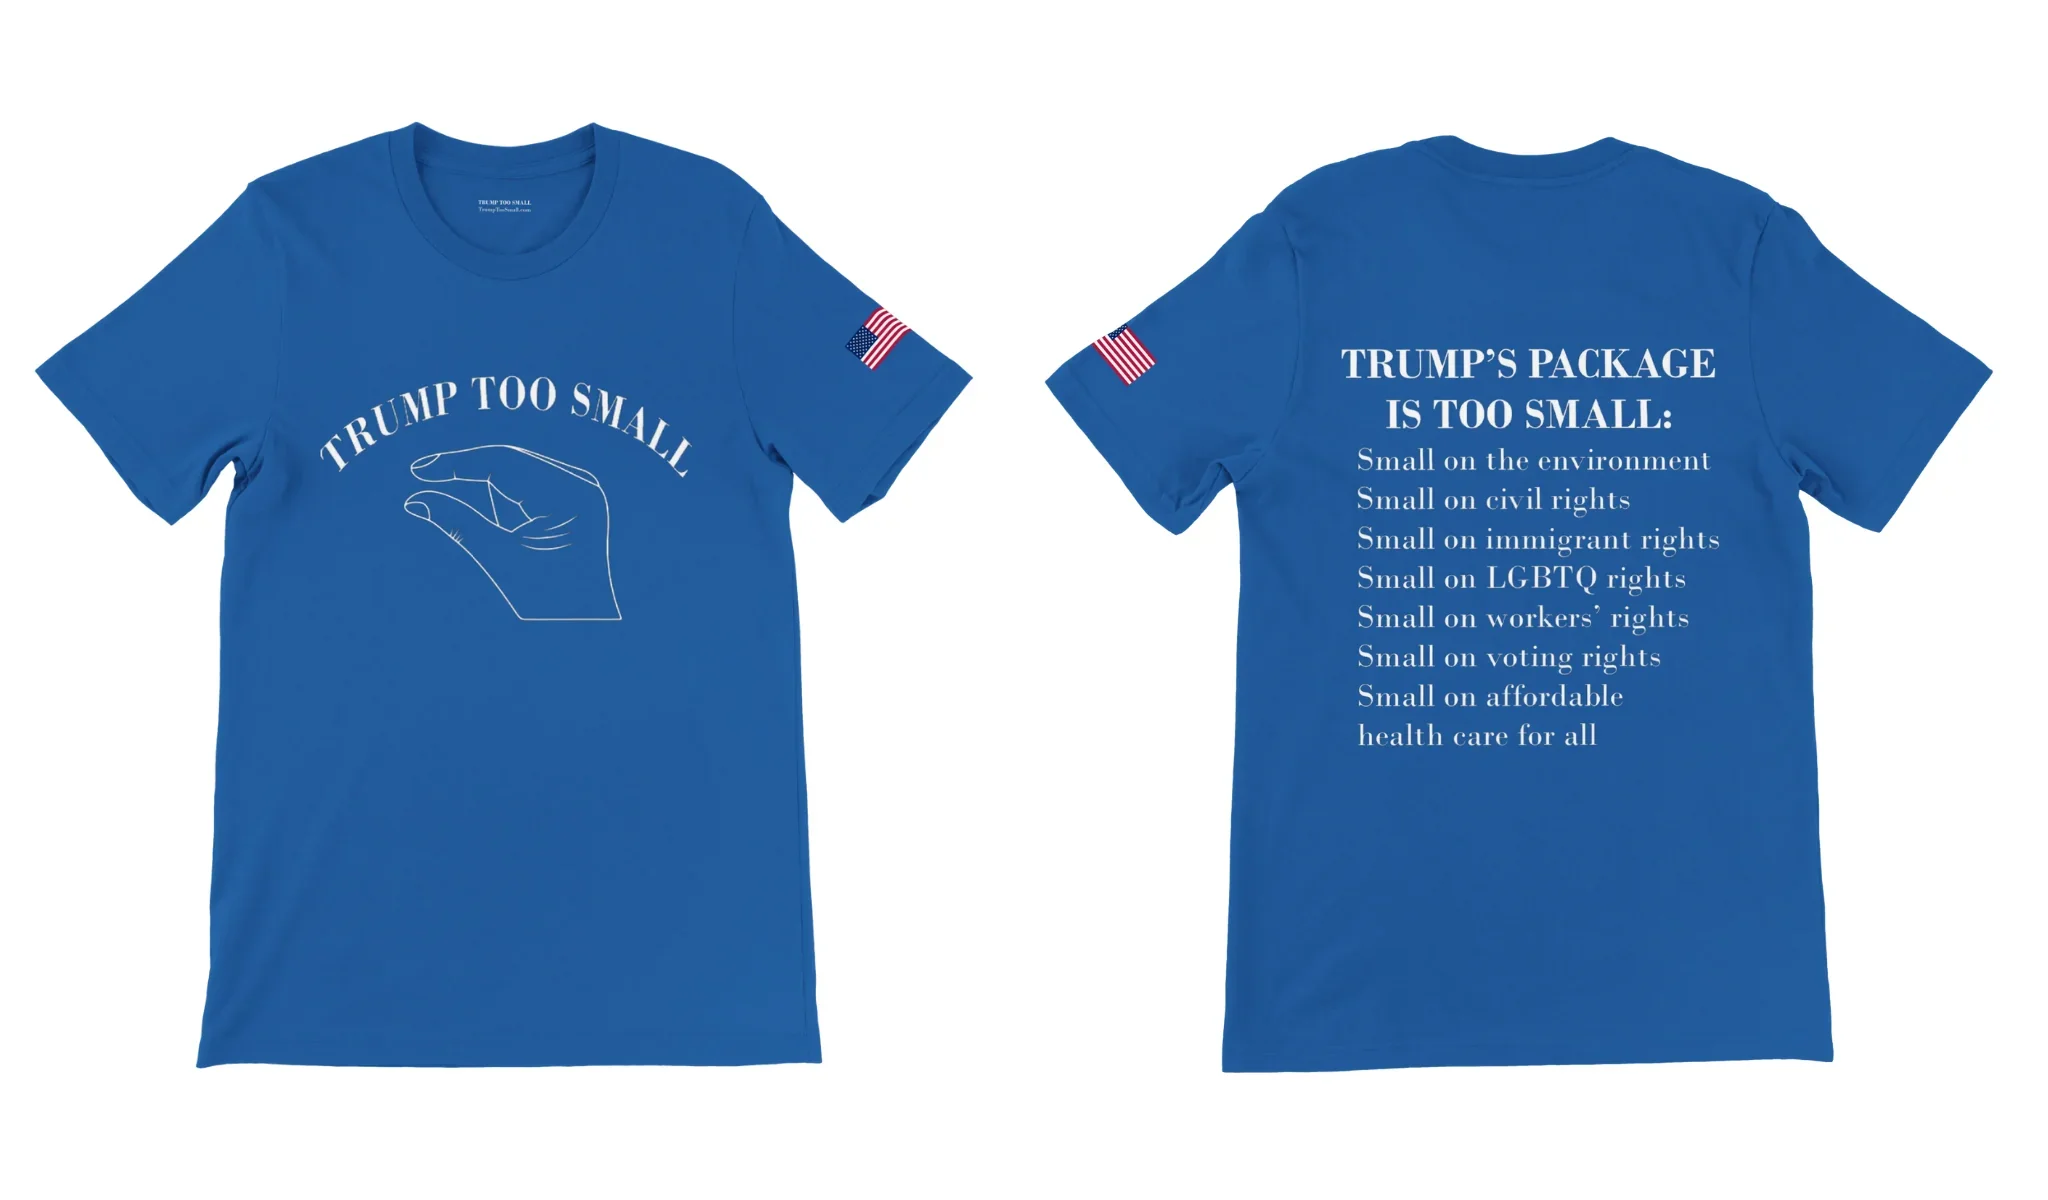 “TRUMP TOO SMALL” shirts made by Steve Elster